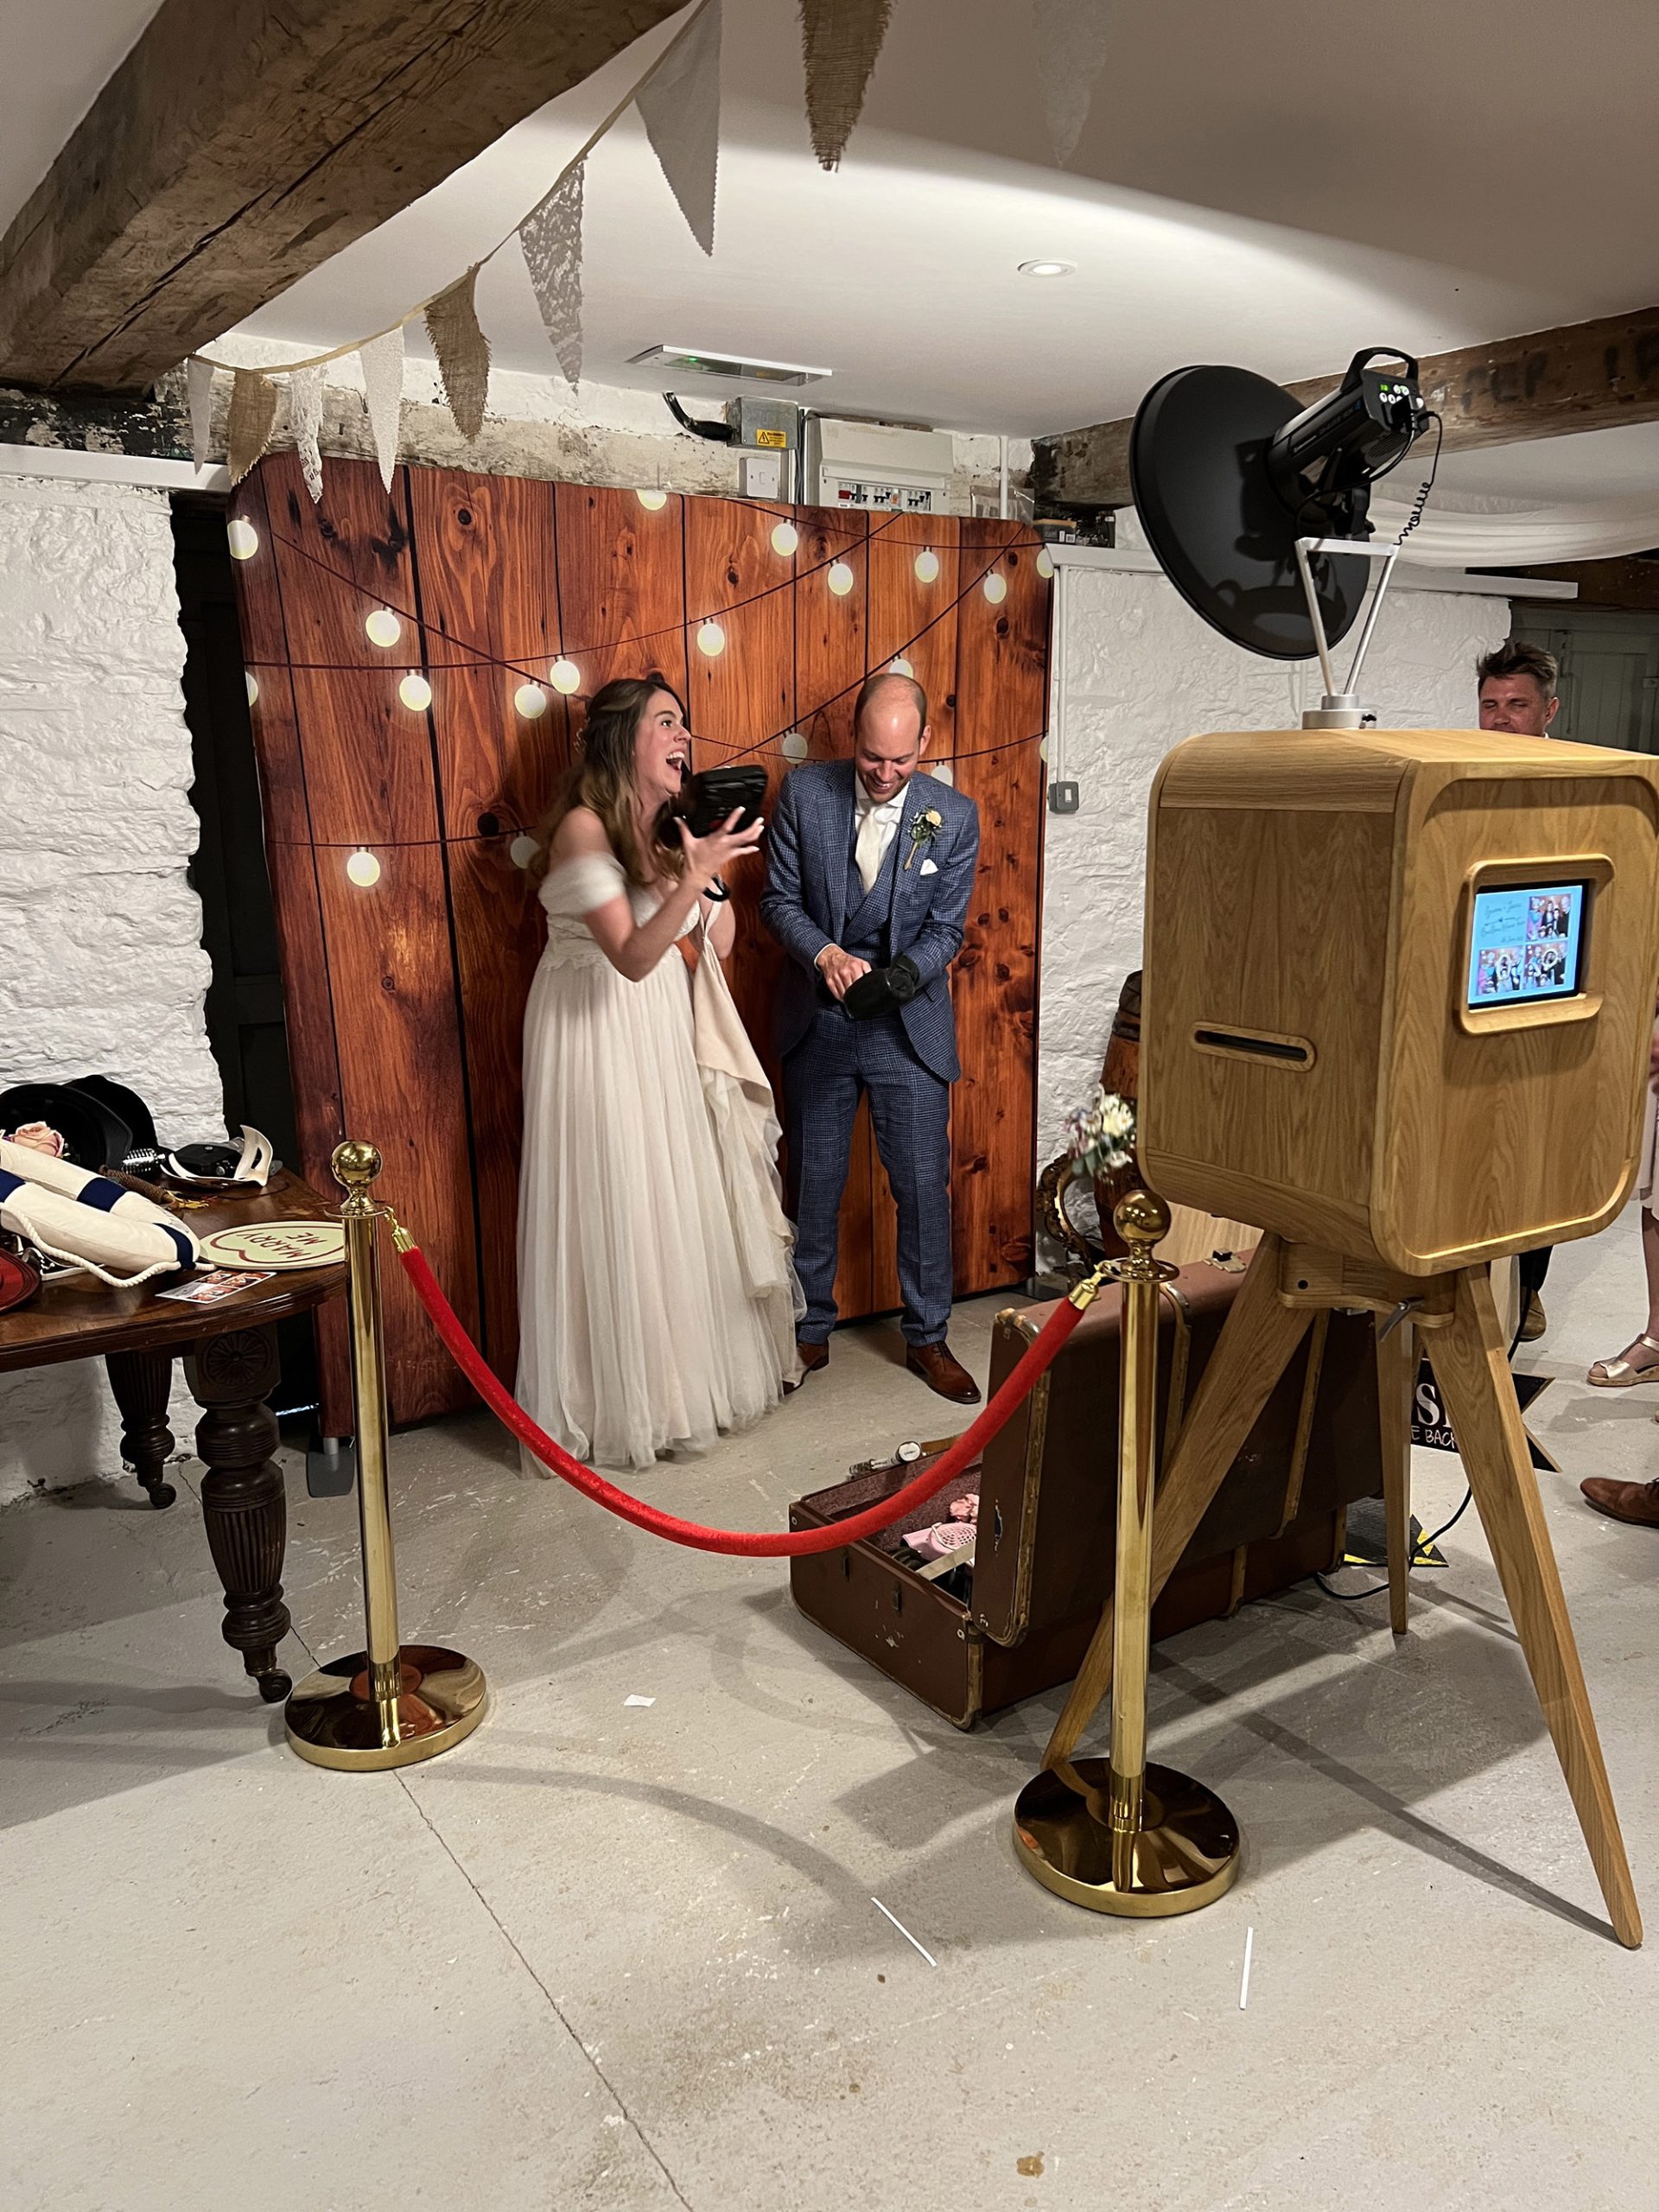 Posh Booth Photo Booth hire Plymouth